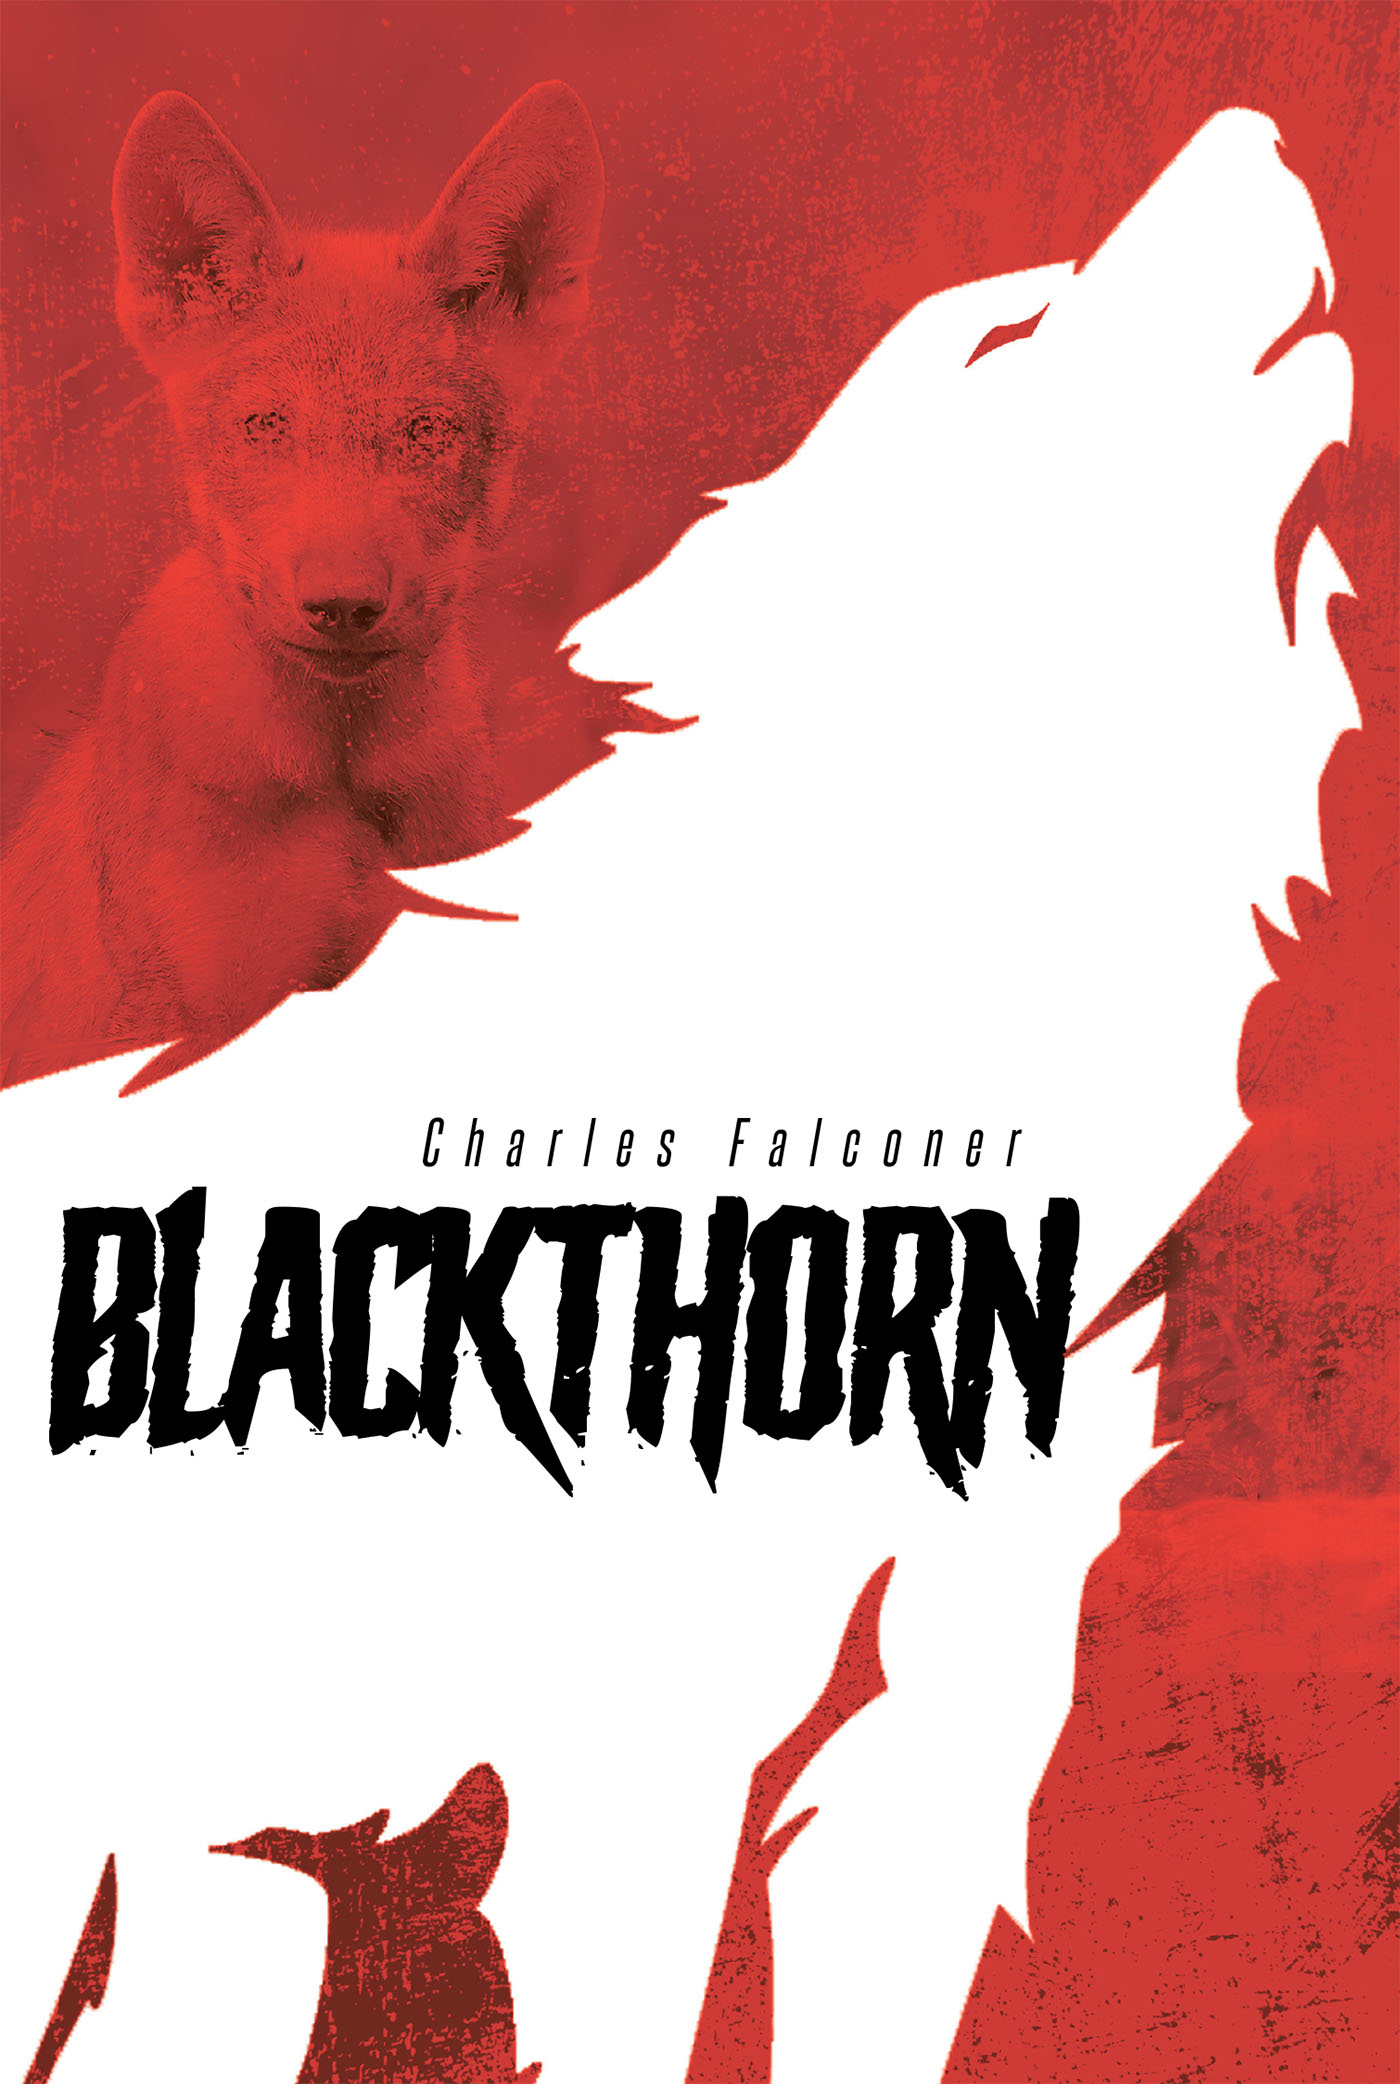 Author Charles Falconer’s New Book, "Blackthorn," is a Spellbinding Fantasy Following an Unlikely Friendship Between a Young Lupine Elf & a Traditionally Hated Human Boy